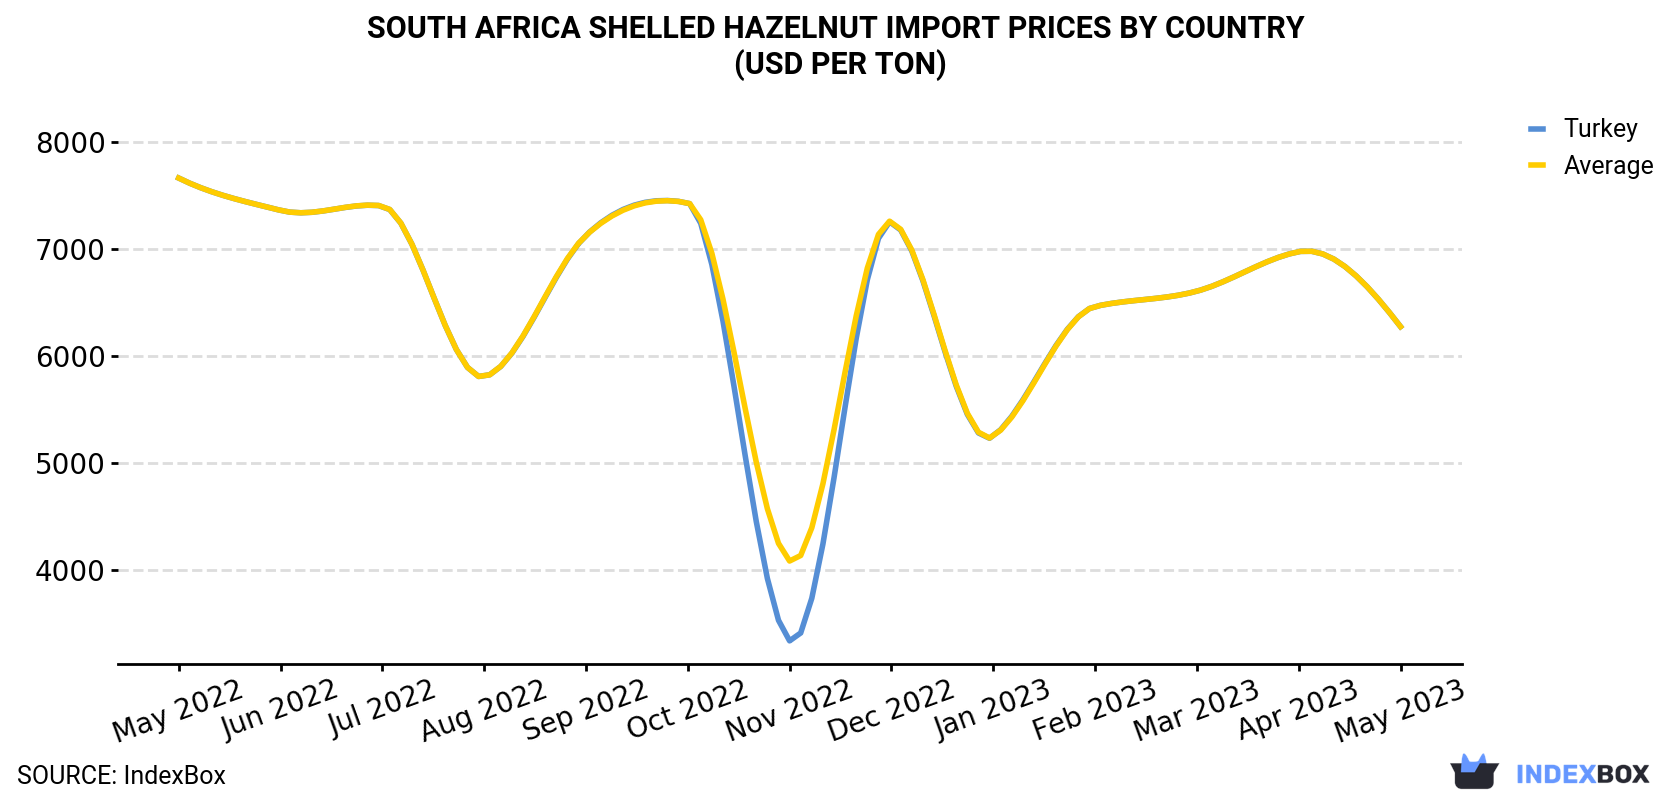 South Africa Shelled Hazelnut Import Prices By Country (USD Per Ton)